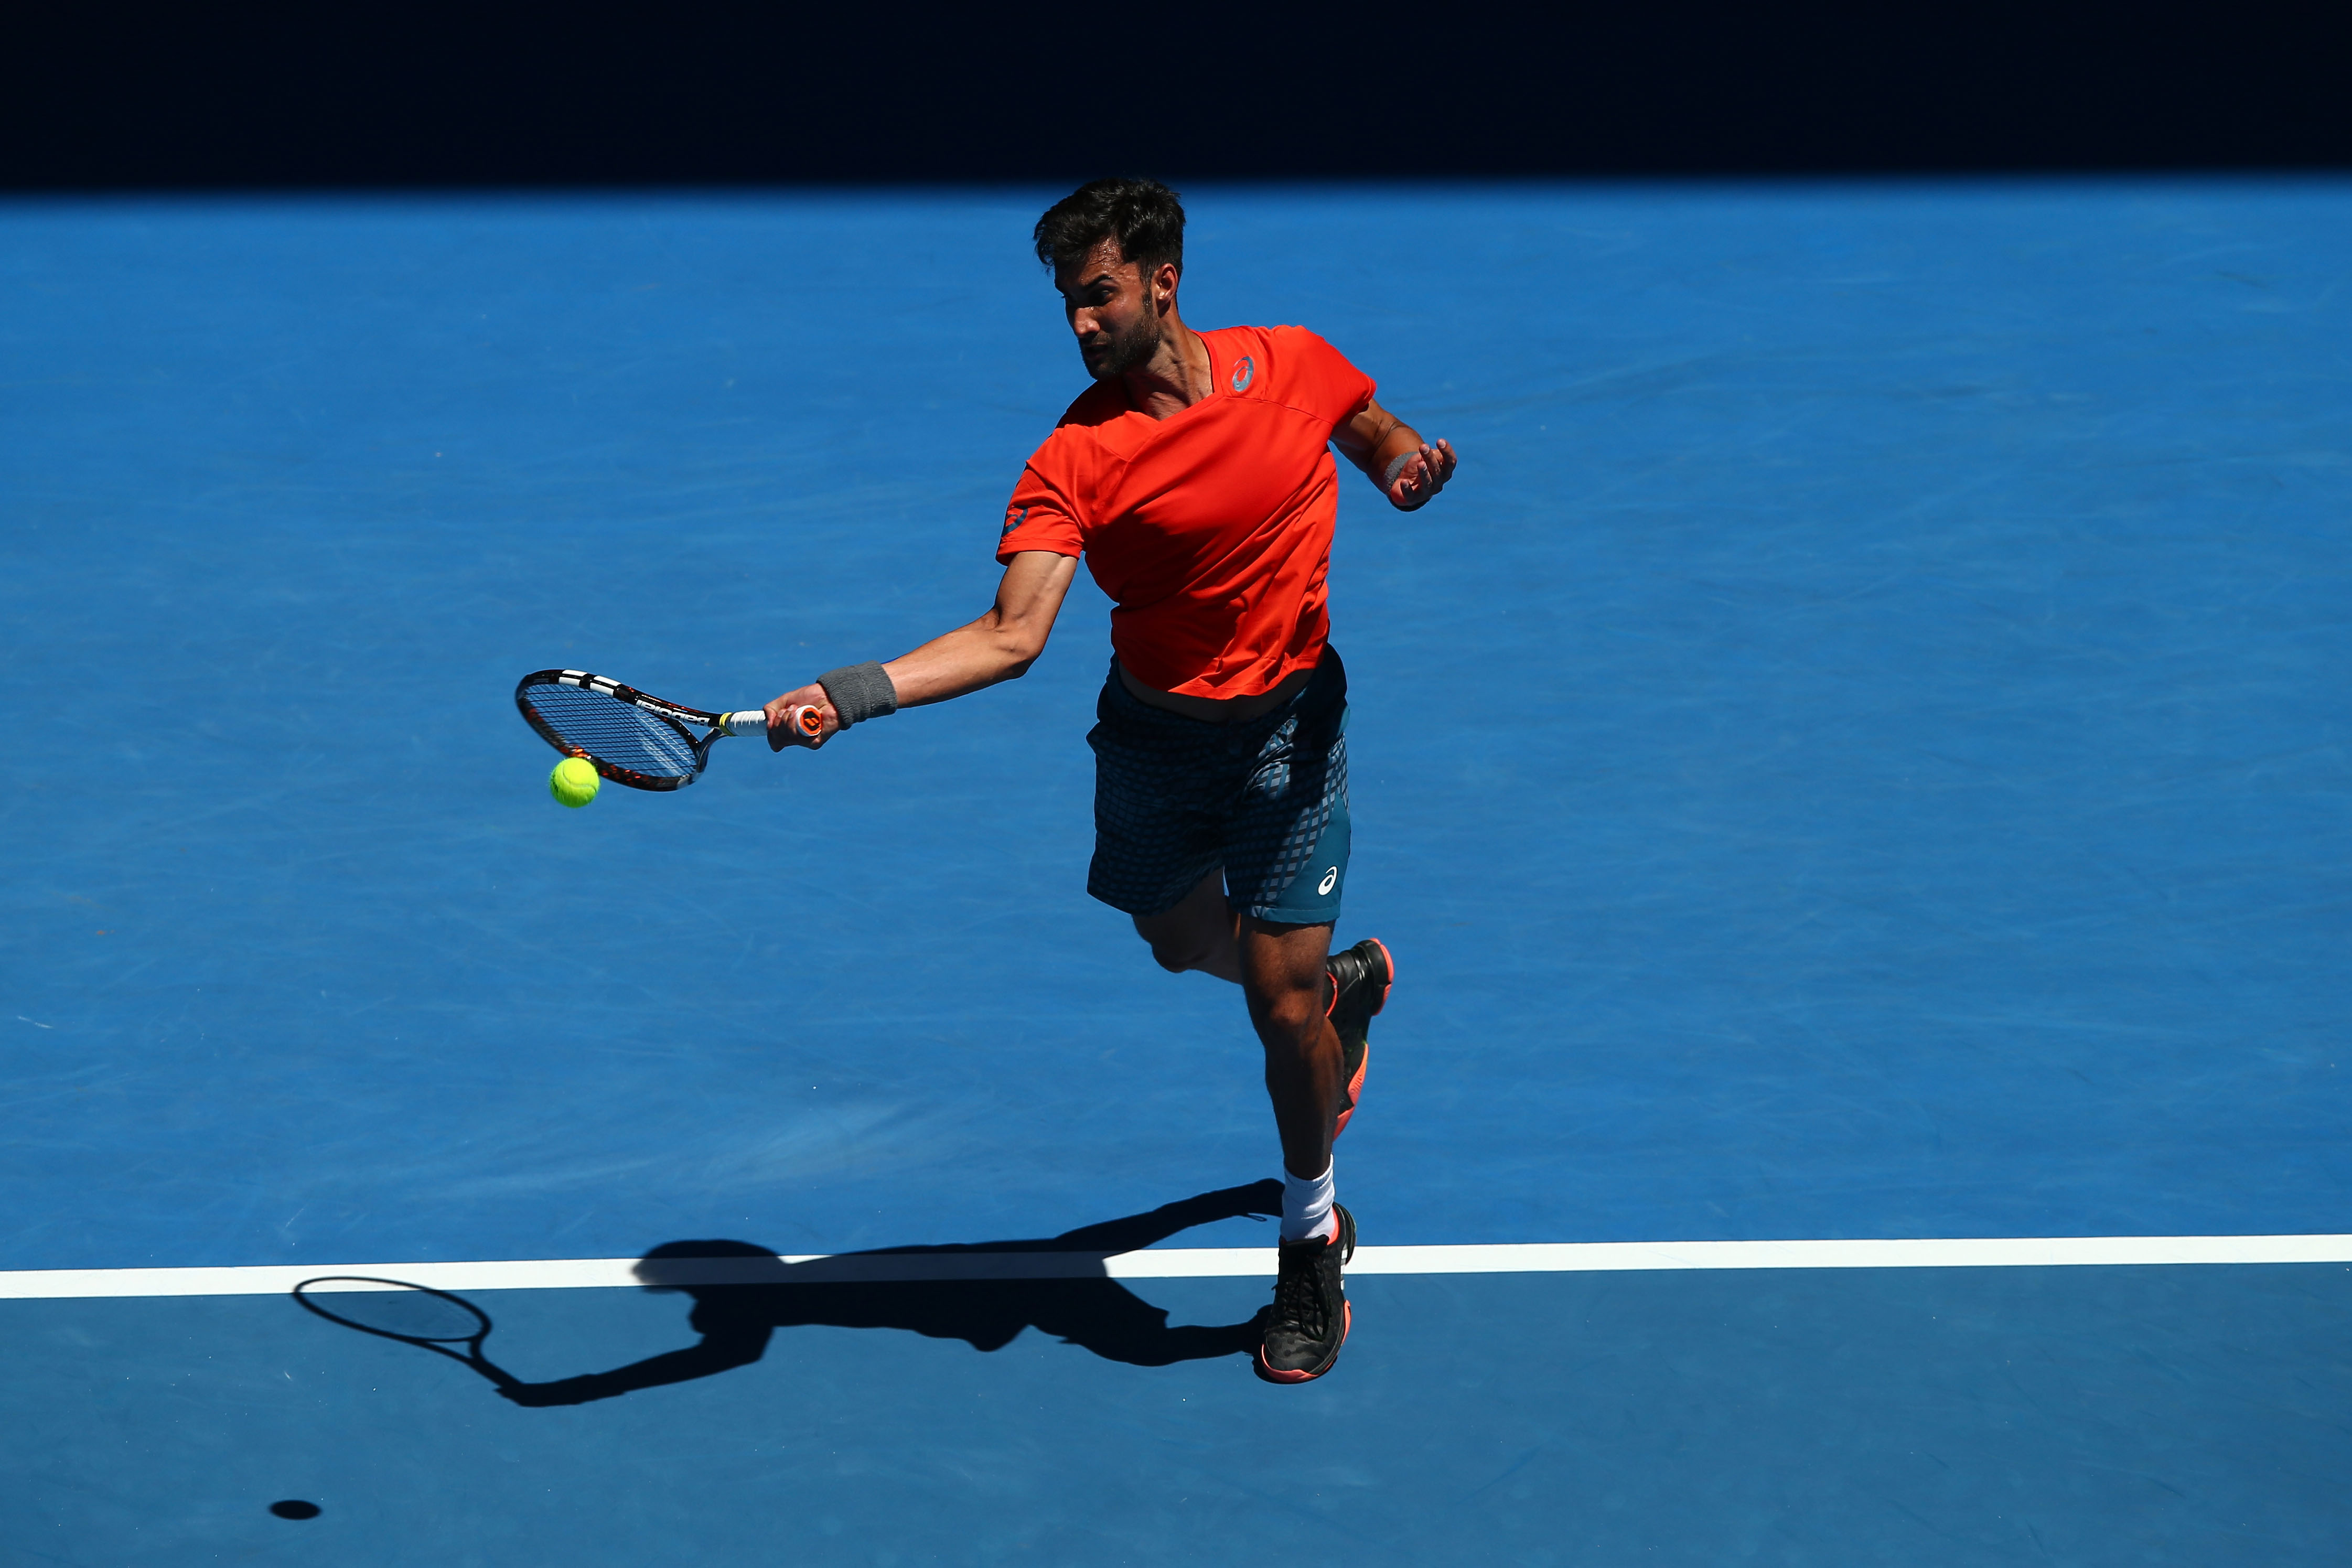 Indian Wells | Yuki Bhambri's memorable run ends with third round loss